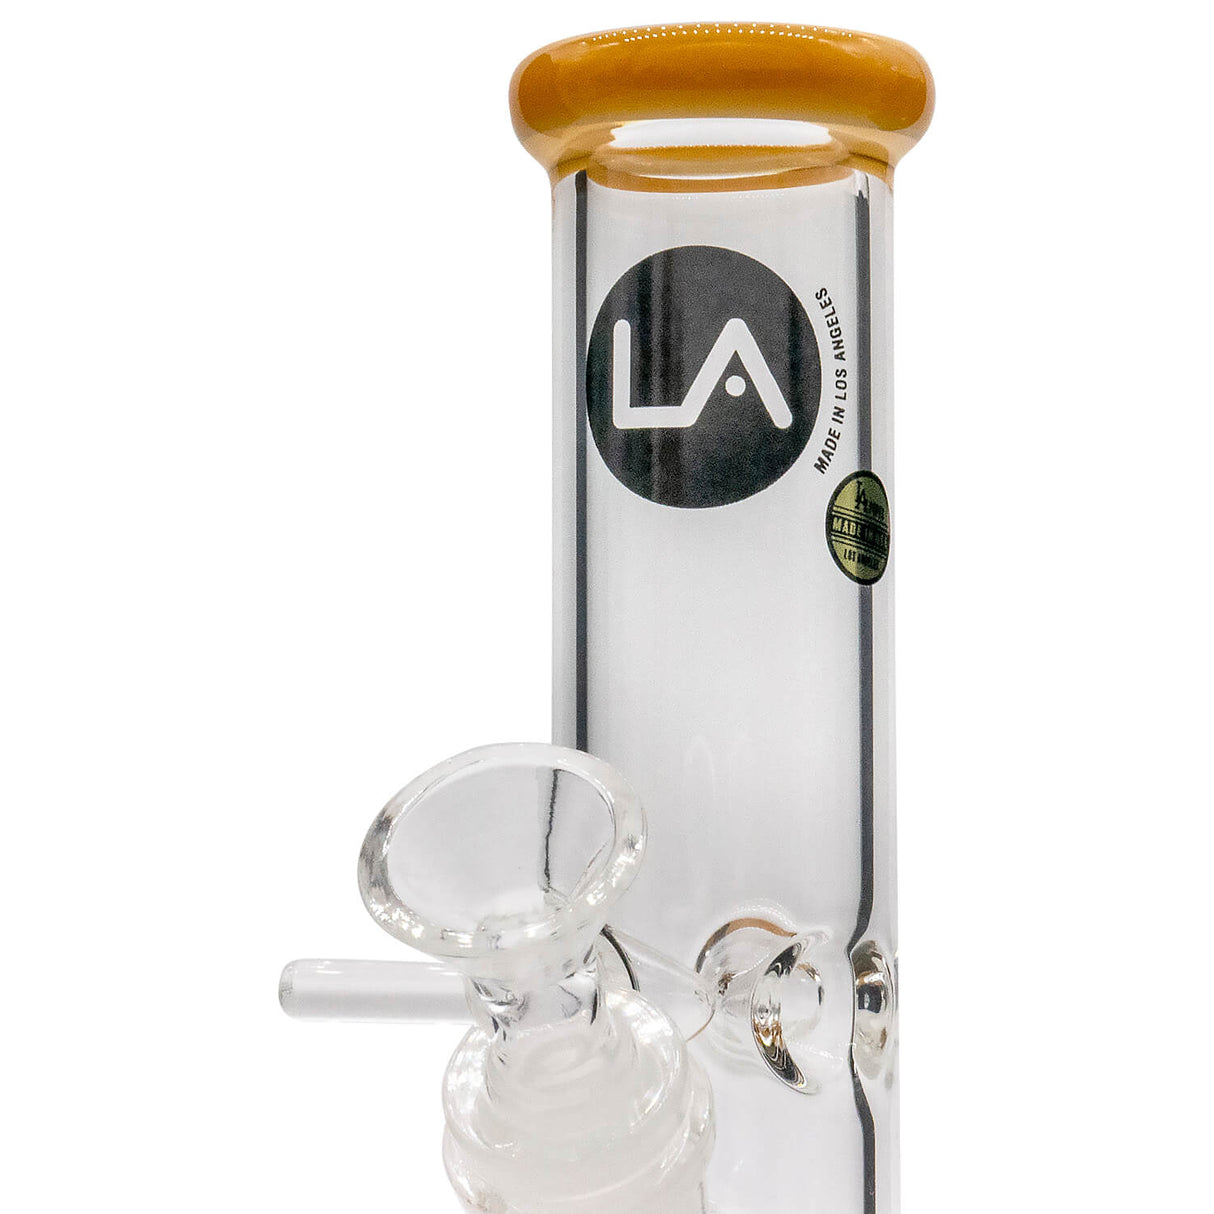 LA Pipes Straight Shooter Bong in Amber, 8" Height, 38mm Diameter, Borosilicate Glass, Front View